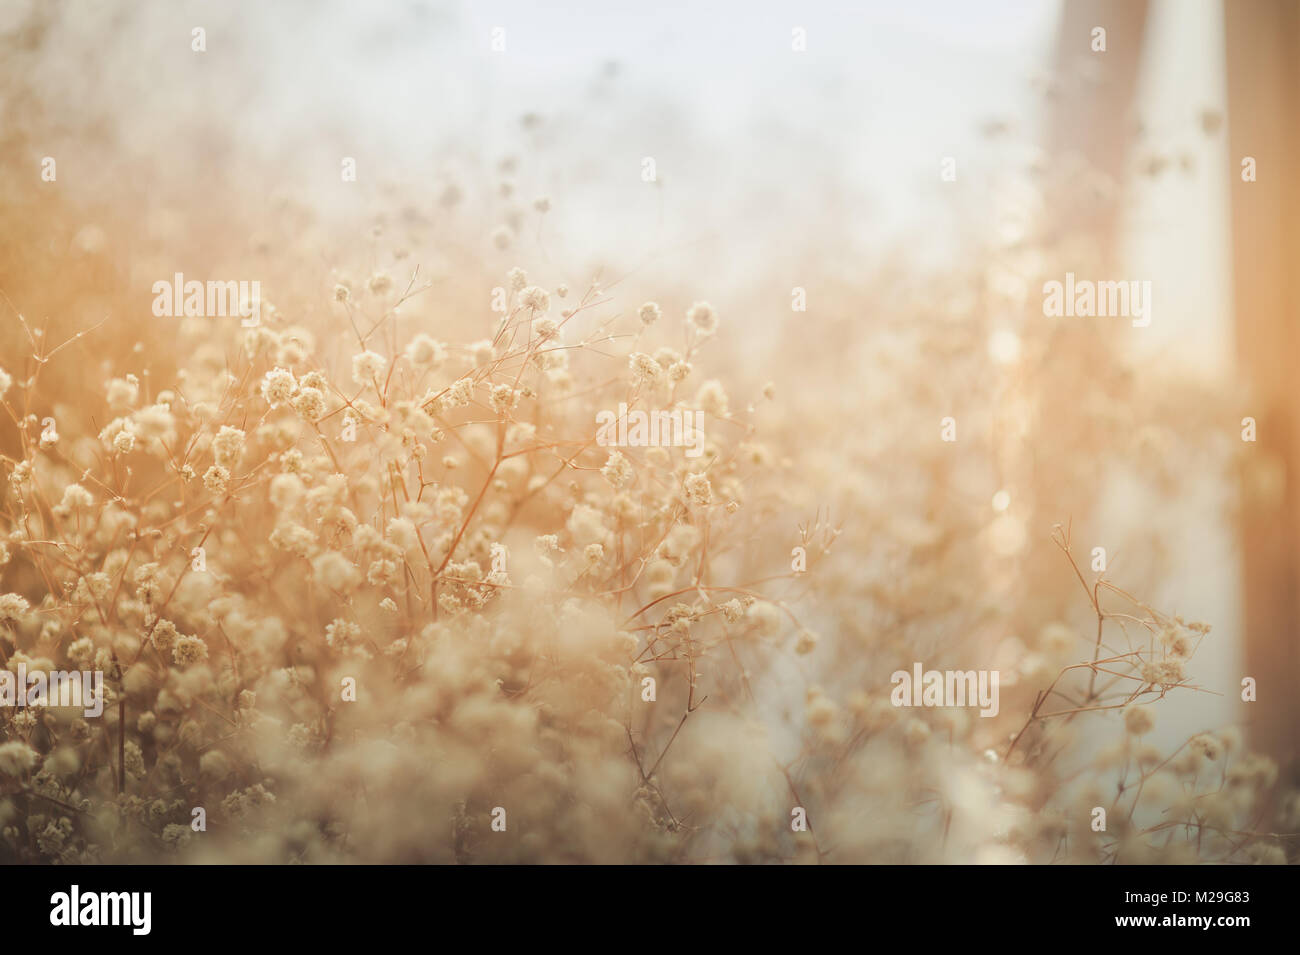 Abstract emotional scene of dried flowers in evening time. Flora in golden hour background concept with vintage filter effect Stock Photo